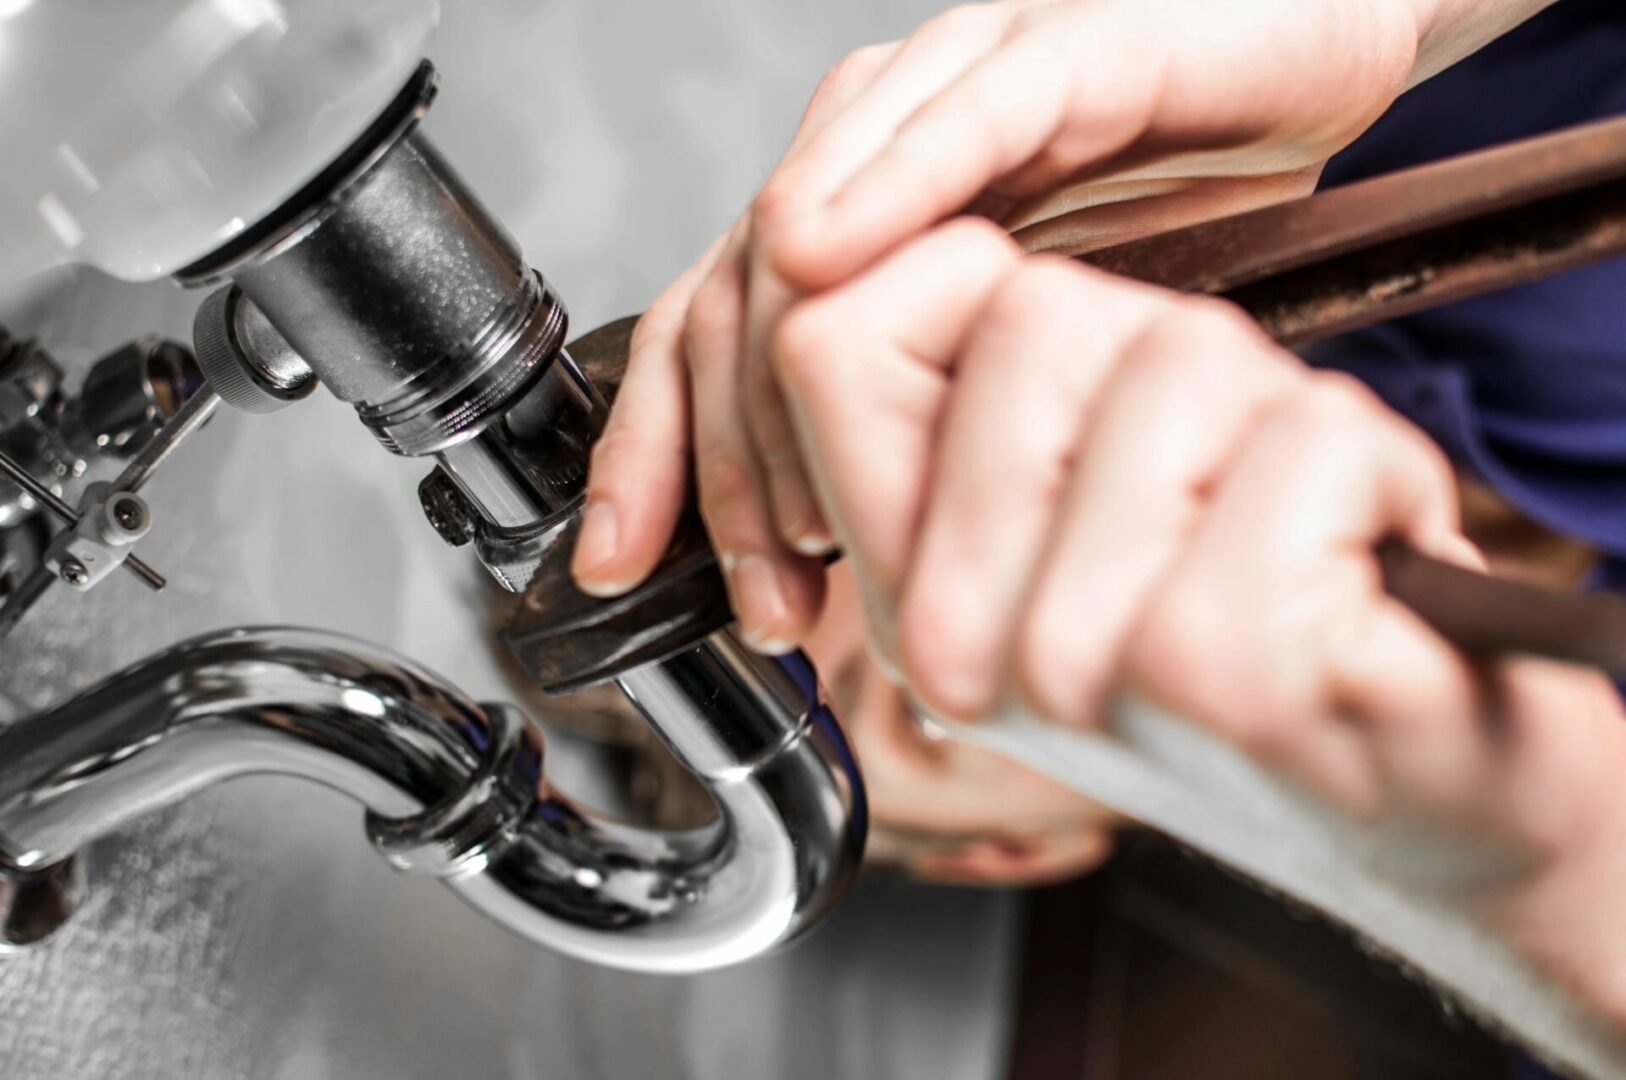 A person is fixing the faucet of a sink.